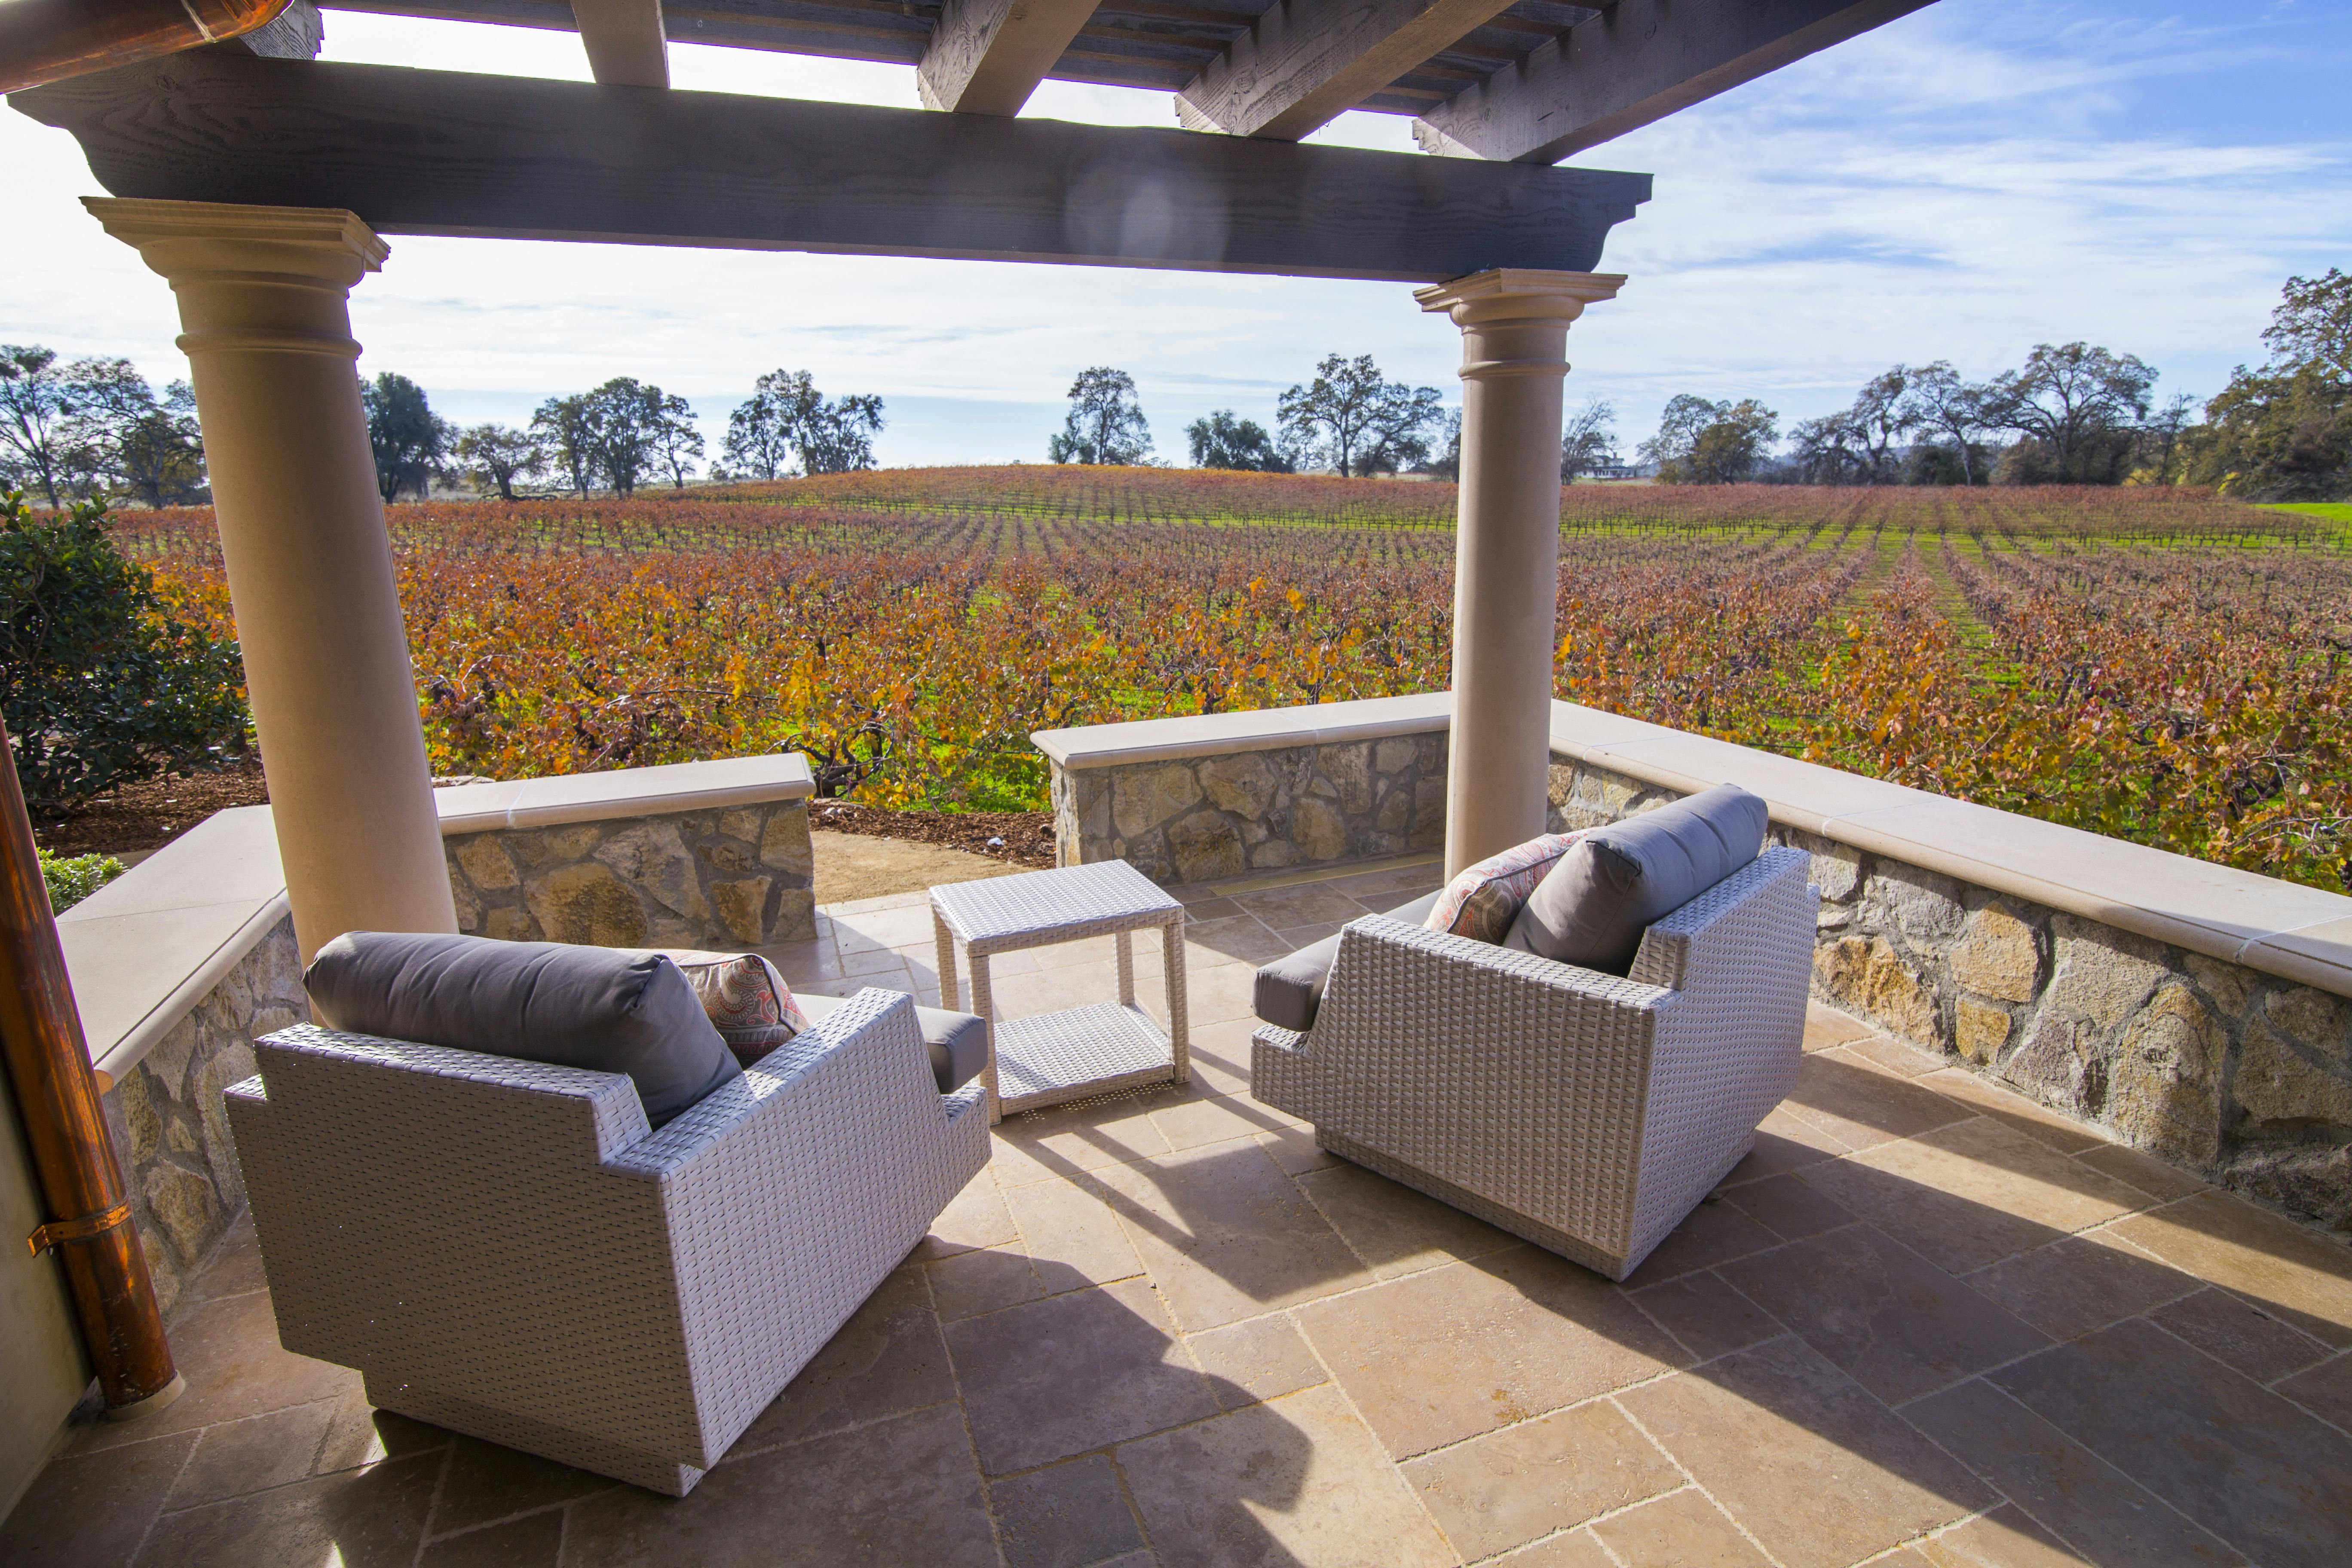 Imagine having your coffee in the morning and your wine in the evening on this private patio with stunning vineyard views